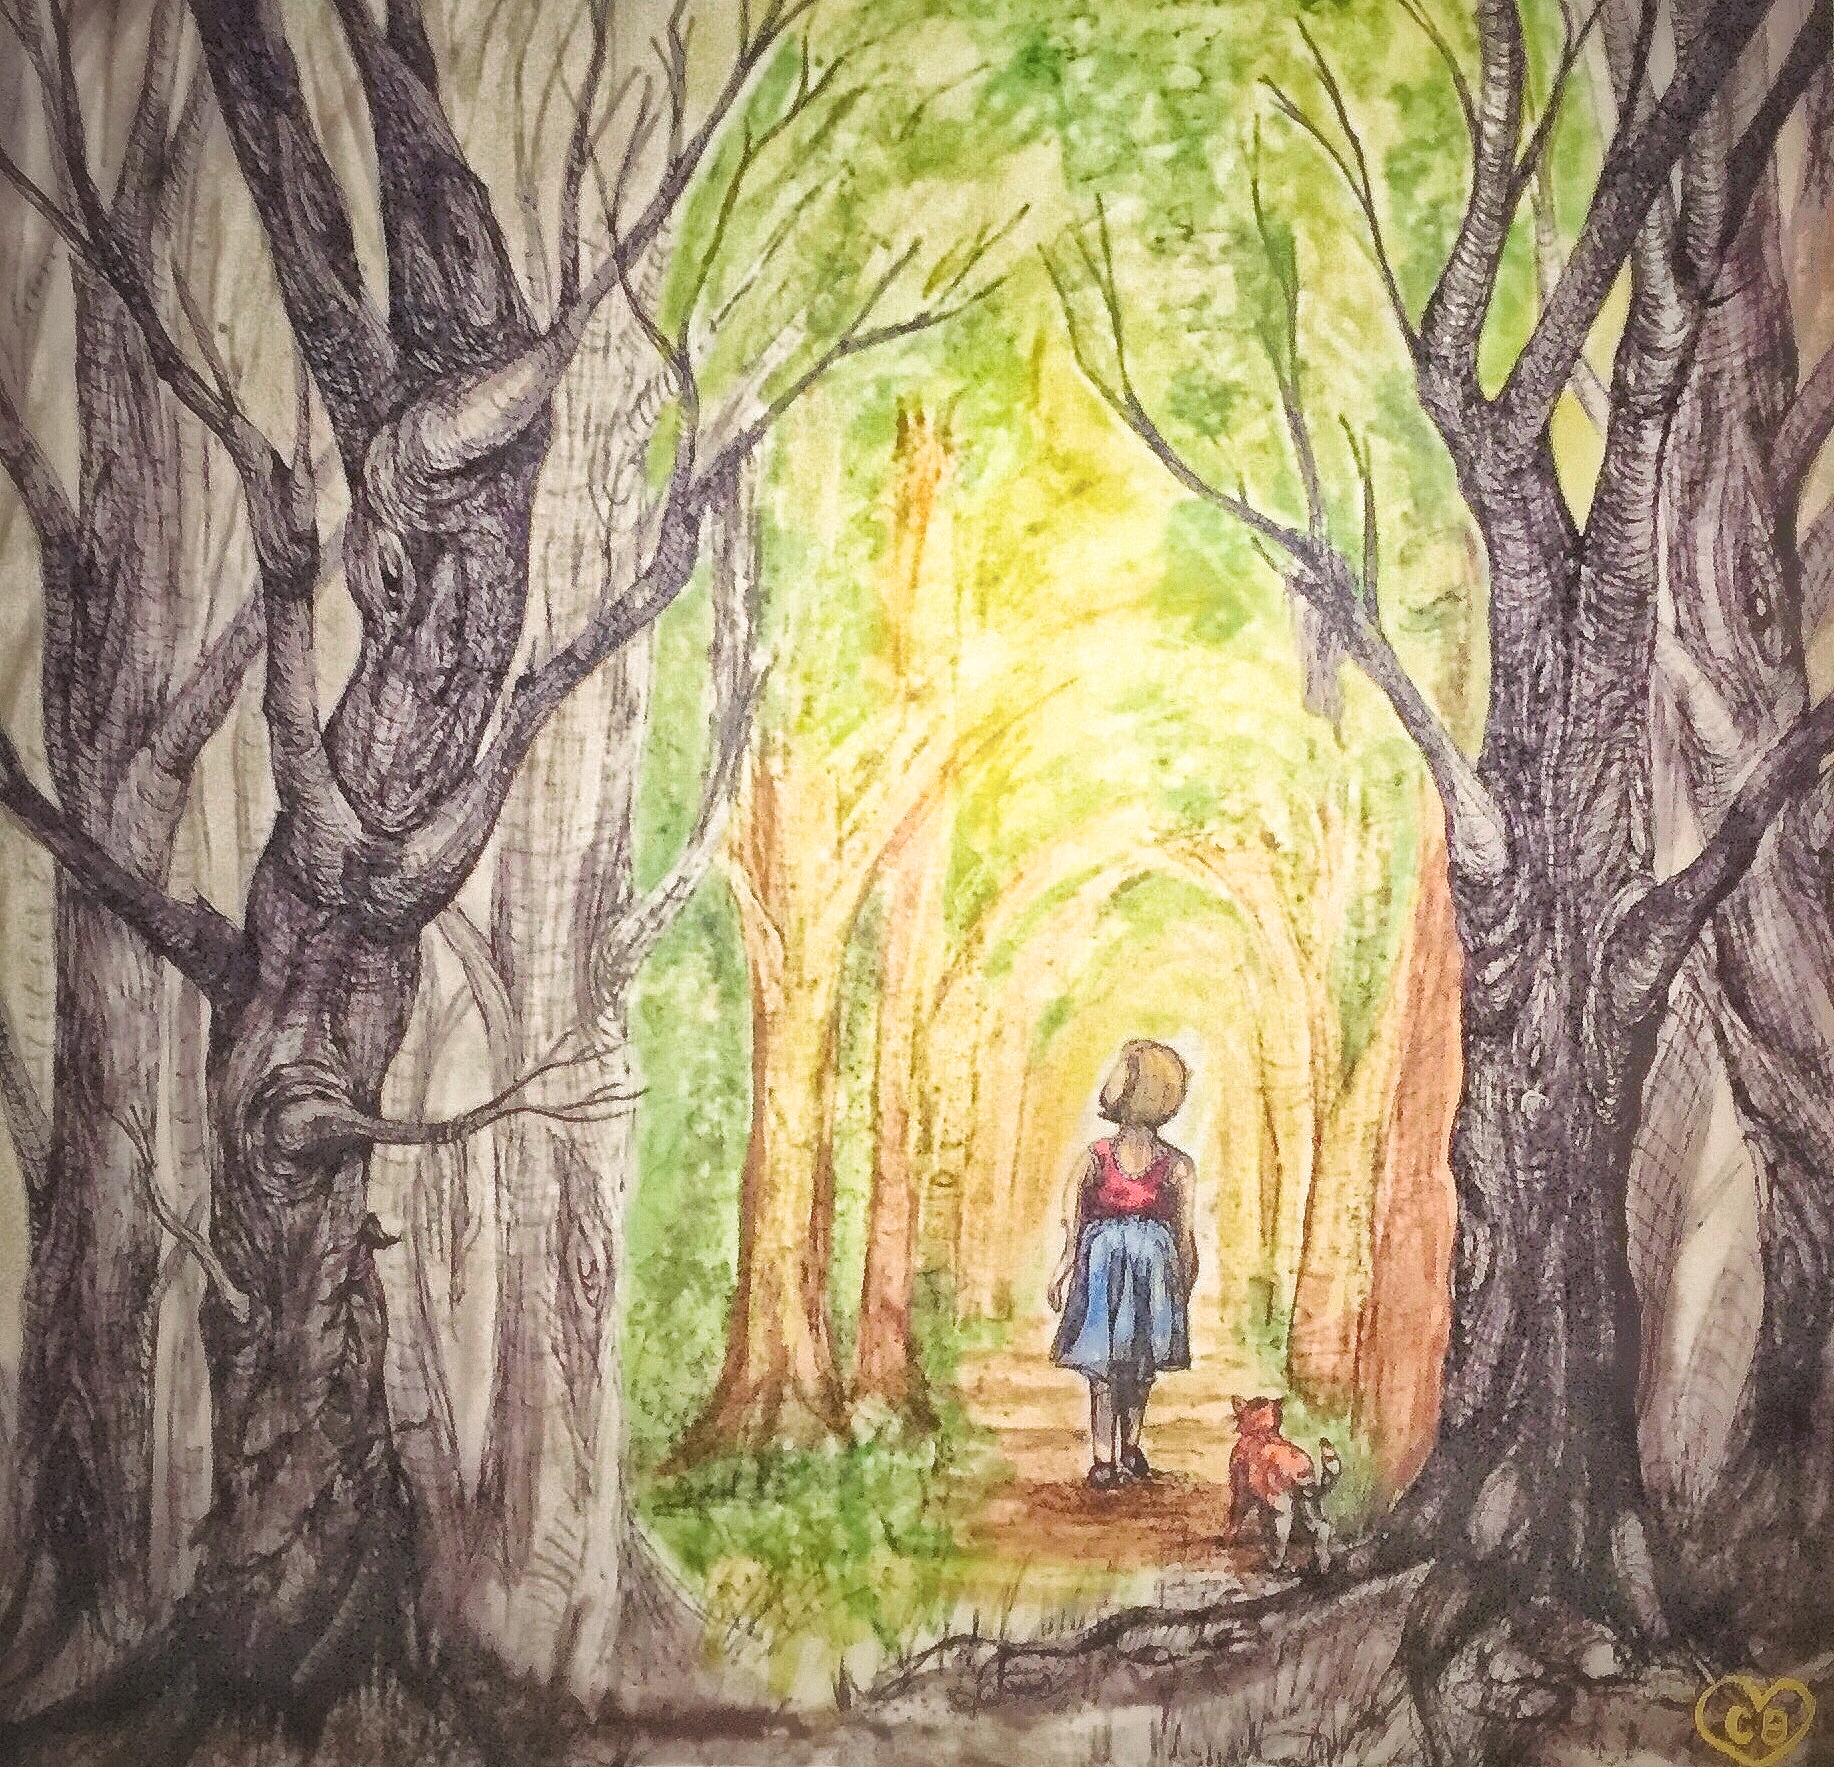 An illustration of a woman walking through a forest.